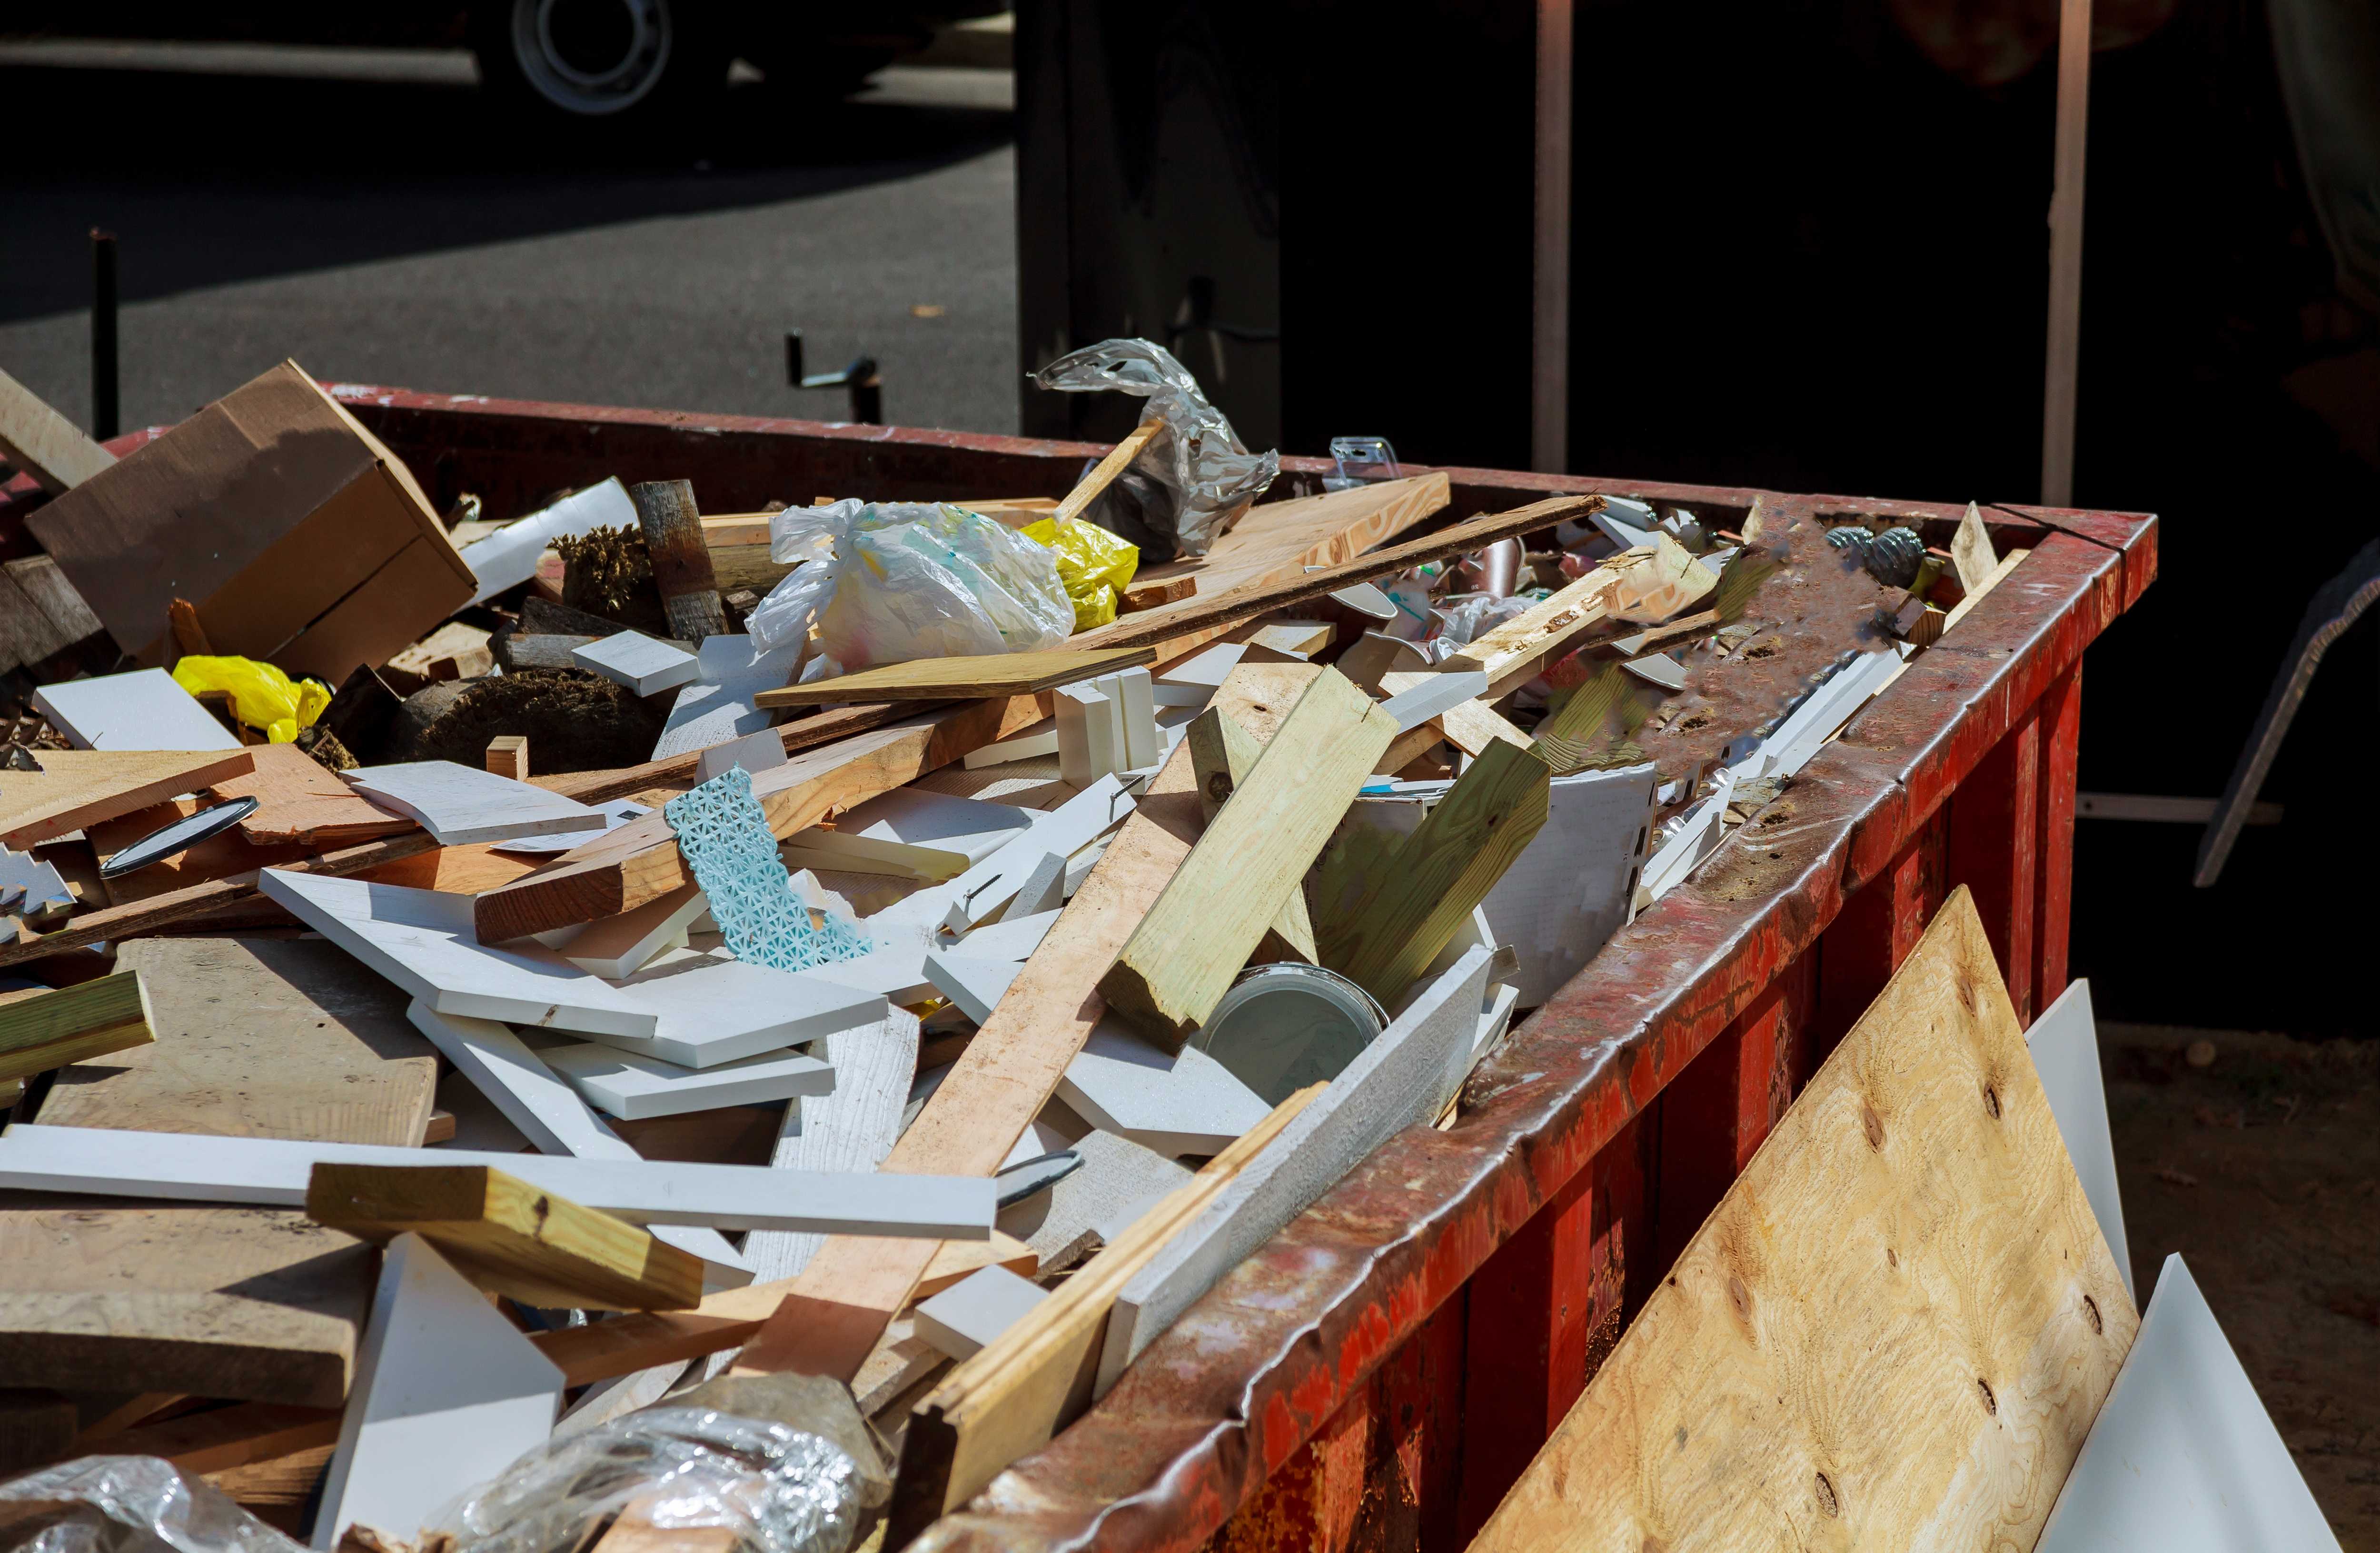 Local Skip Hire Services in Hawthorn